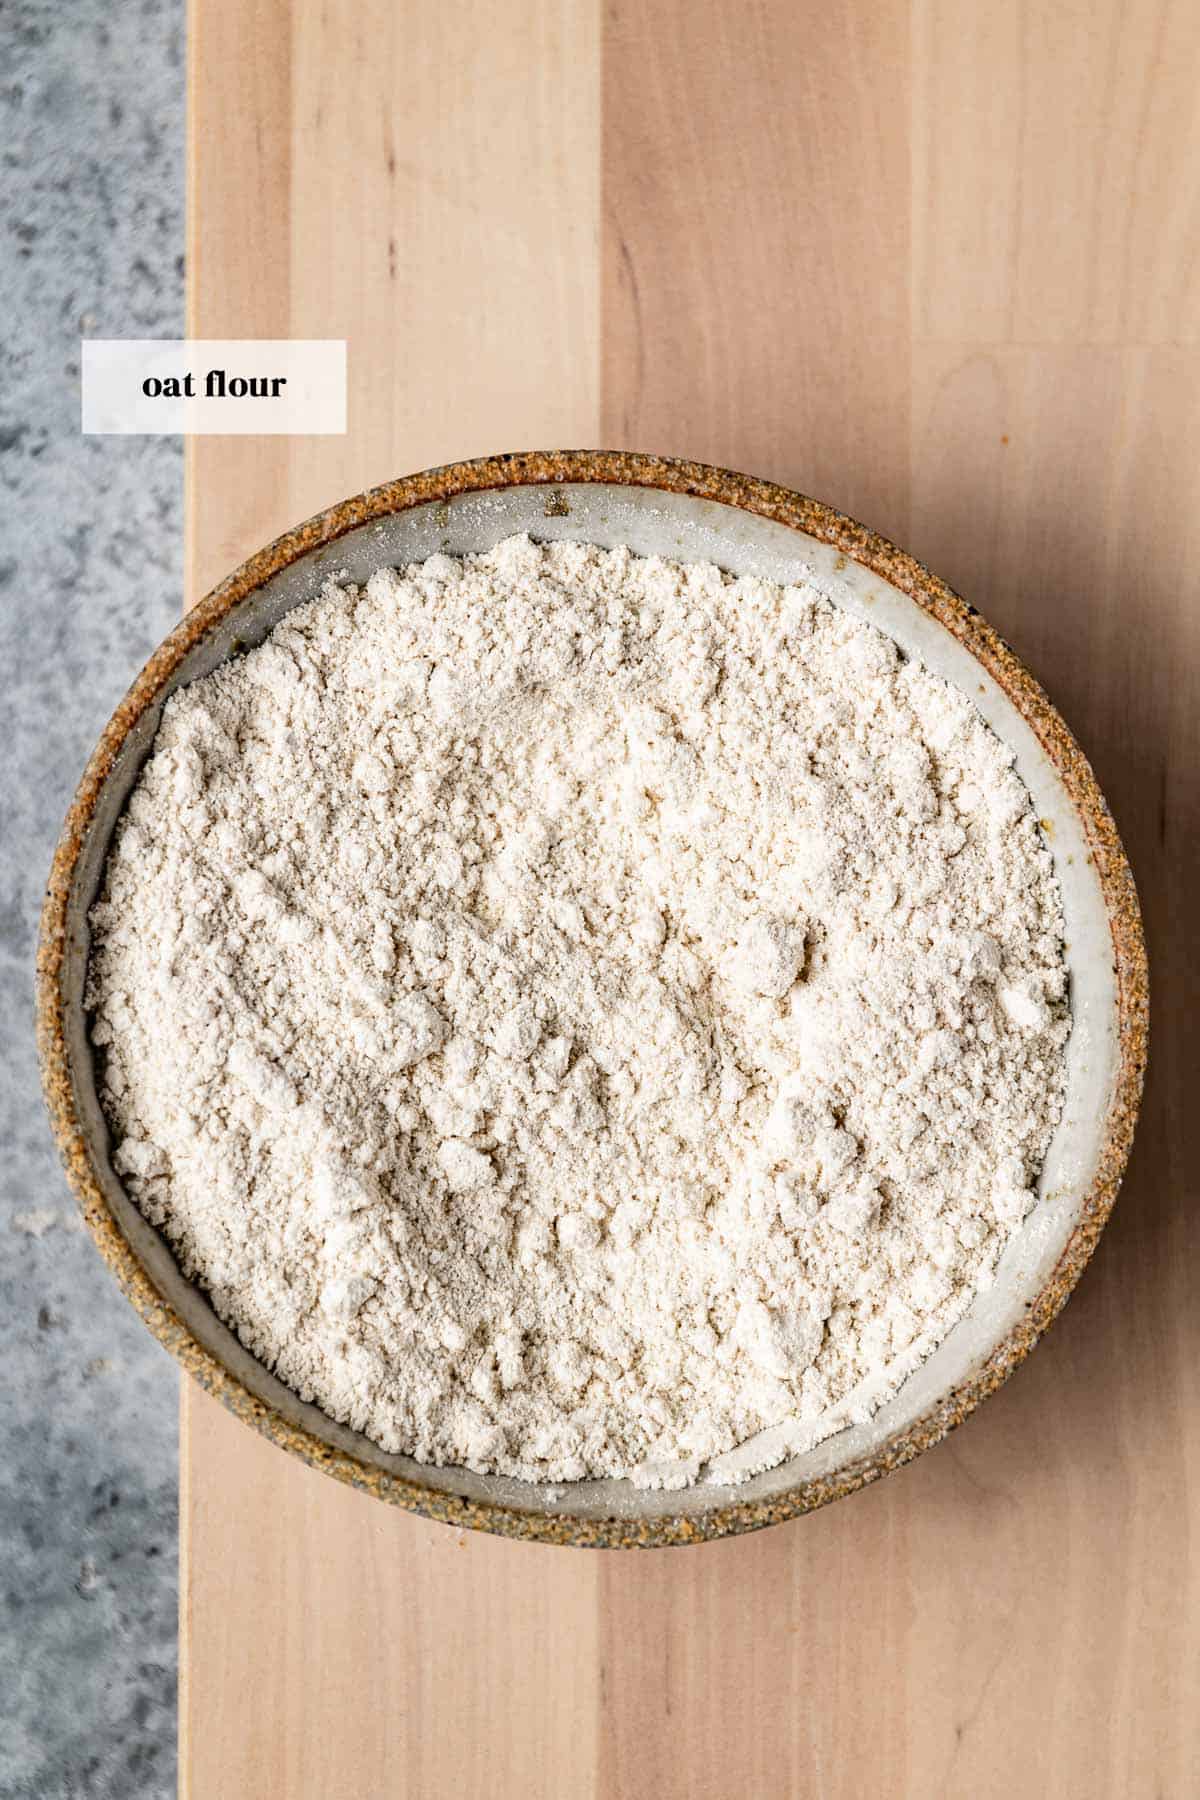 Oat flour in a bowl from the top view.